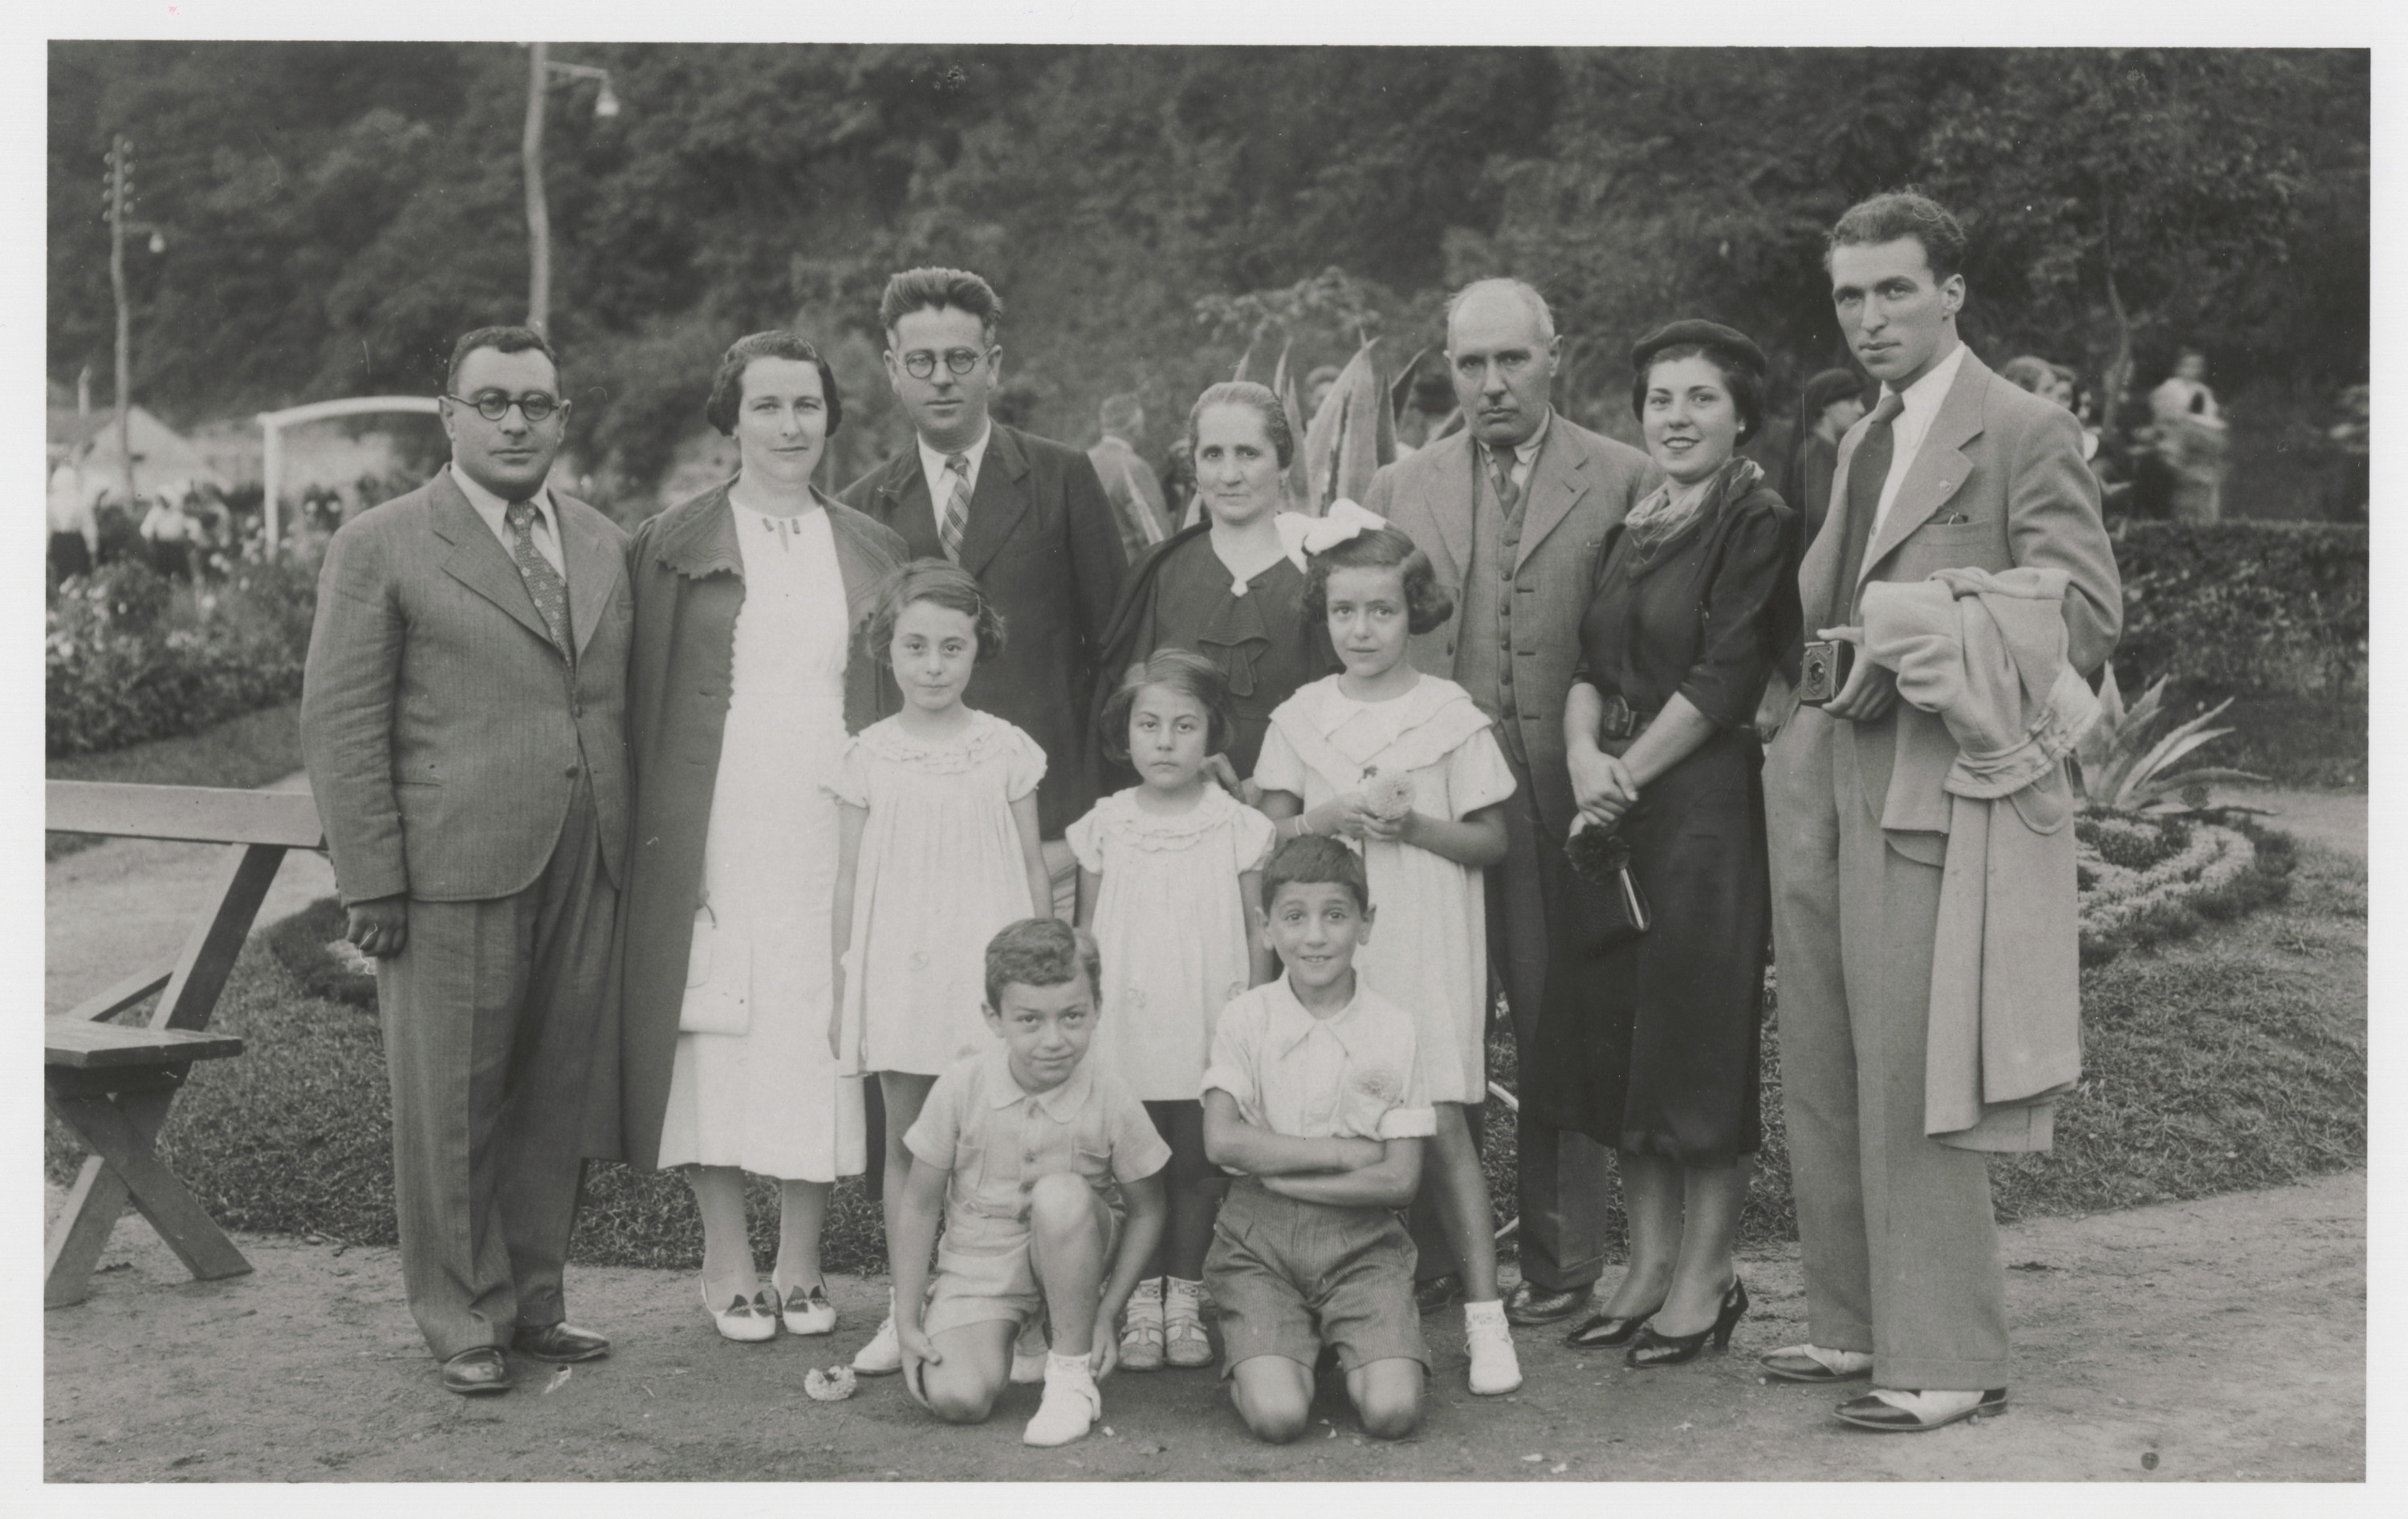 A group of friends on summer vacation at the sulfur baths at Vranjska Banja.

Among those pictured are Mato (nee Franco) Nahmias (back row, fourth from left), Avram Nahmias (back row, third from right), and Victor Nahmias (kneeling in front, on the right).